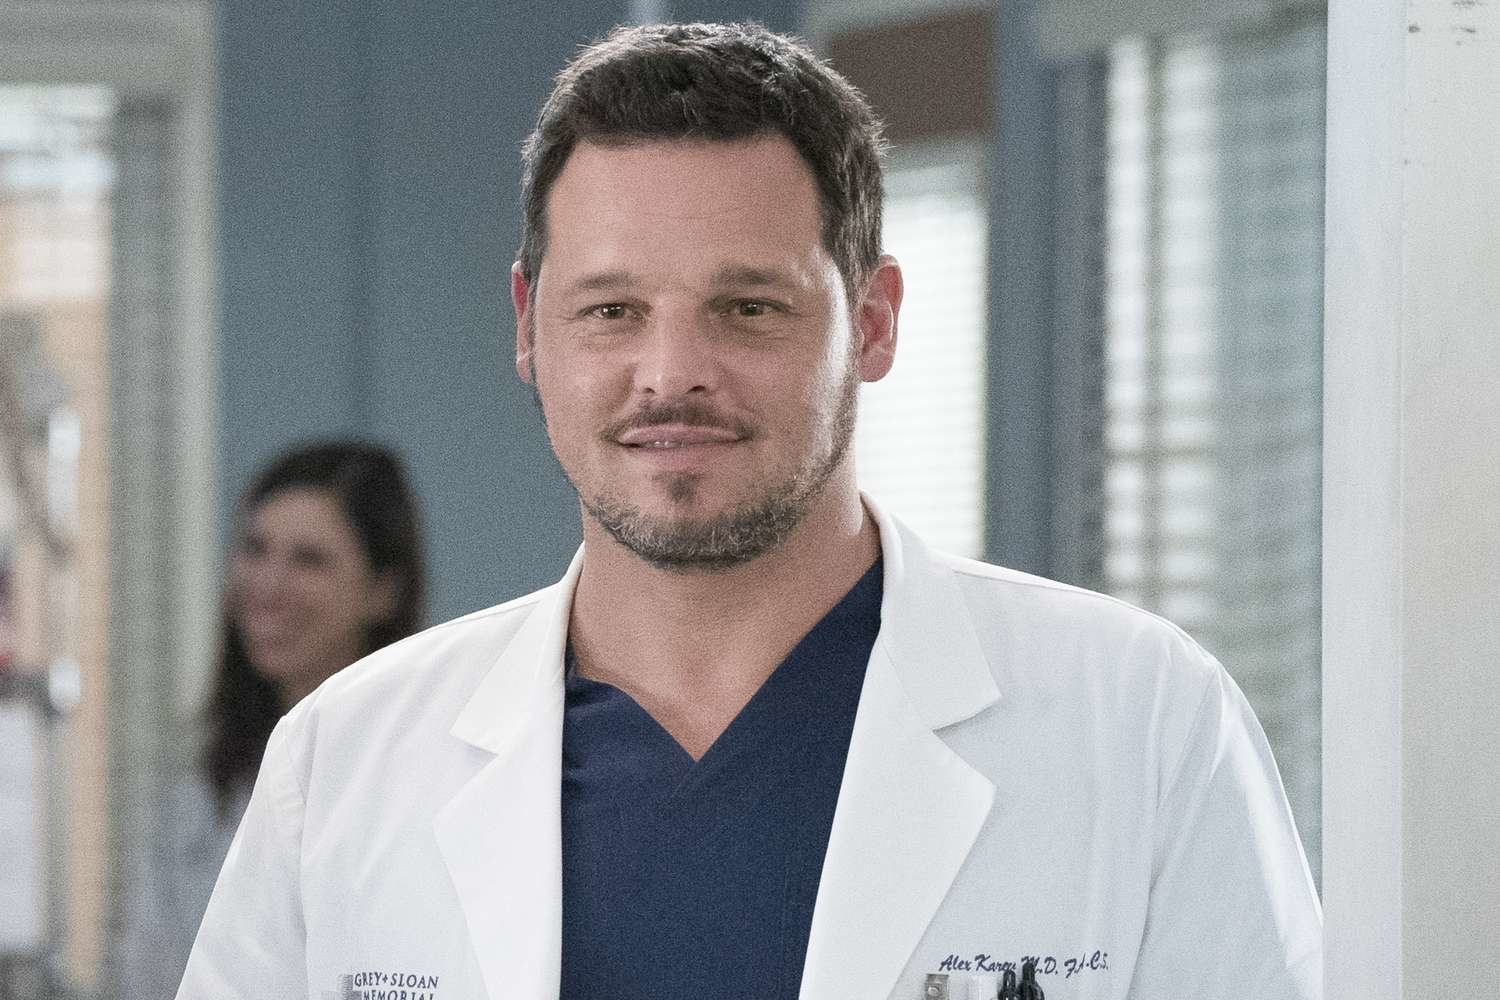 TV character, Dr. Alex Karev from the show, in medical attire, standing in a hospital setting